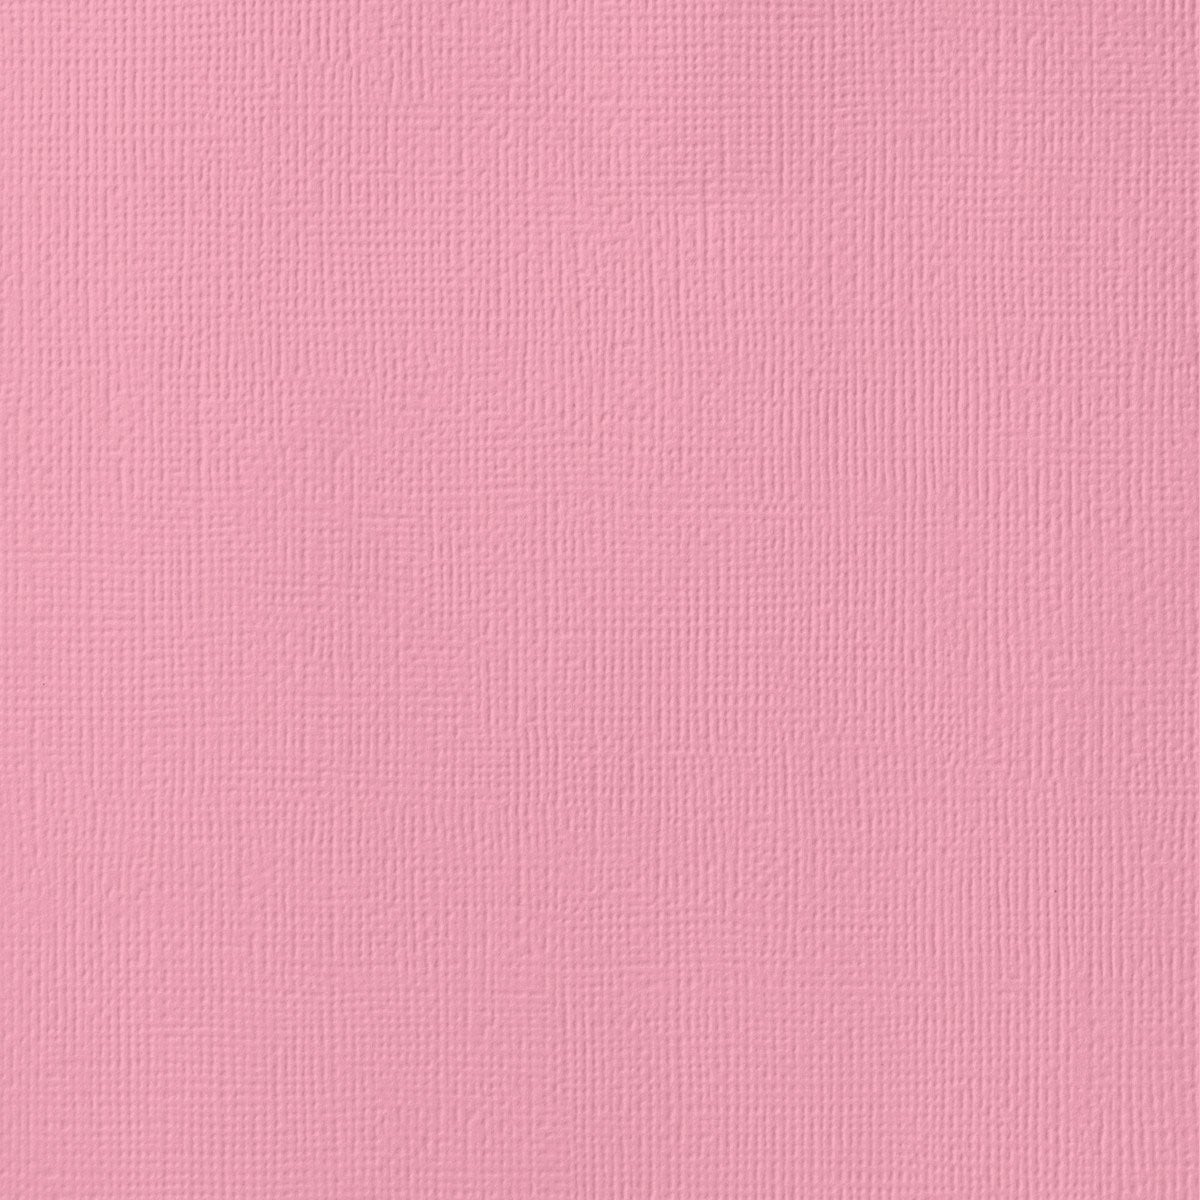 LUXPaper 8.5” x 11” Cardstock for Crafts and Cards in 100 lb. Candy Pink, Scrapbook Supplies, 50 Pack (Pink)